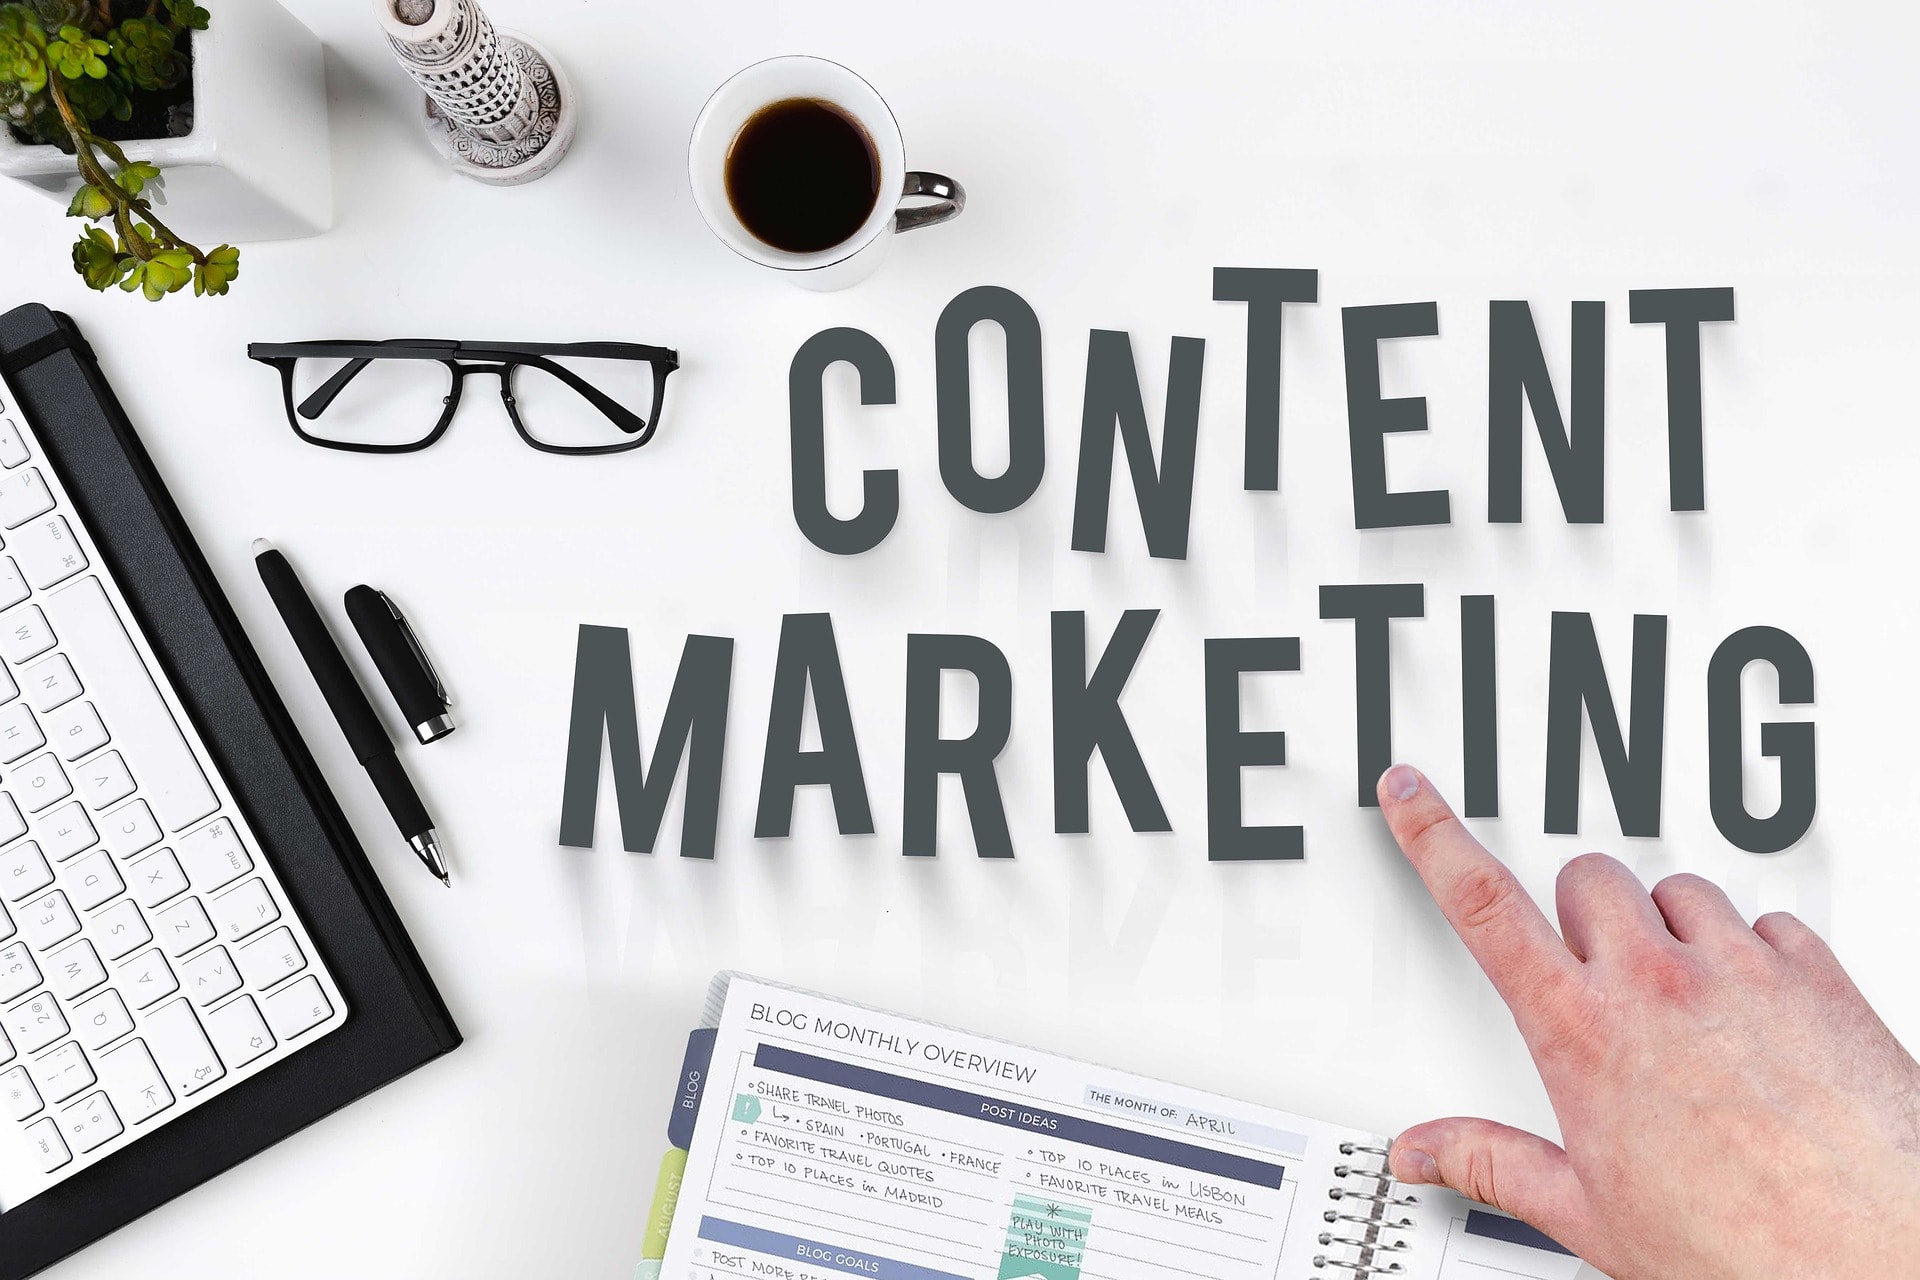 Difference Between Content Marketing1V1 Branded Content1V1 and Native Advertising?